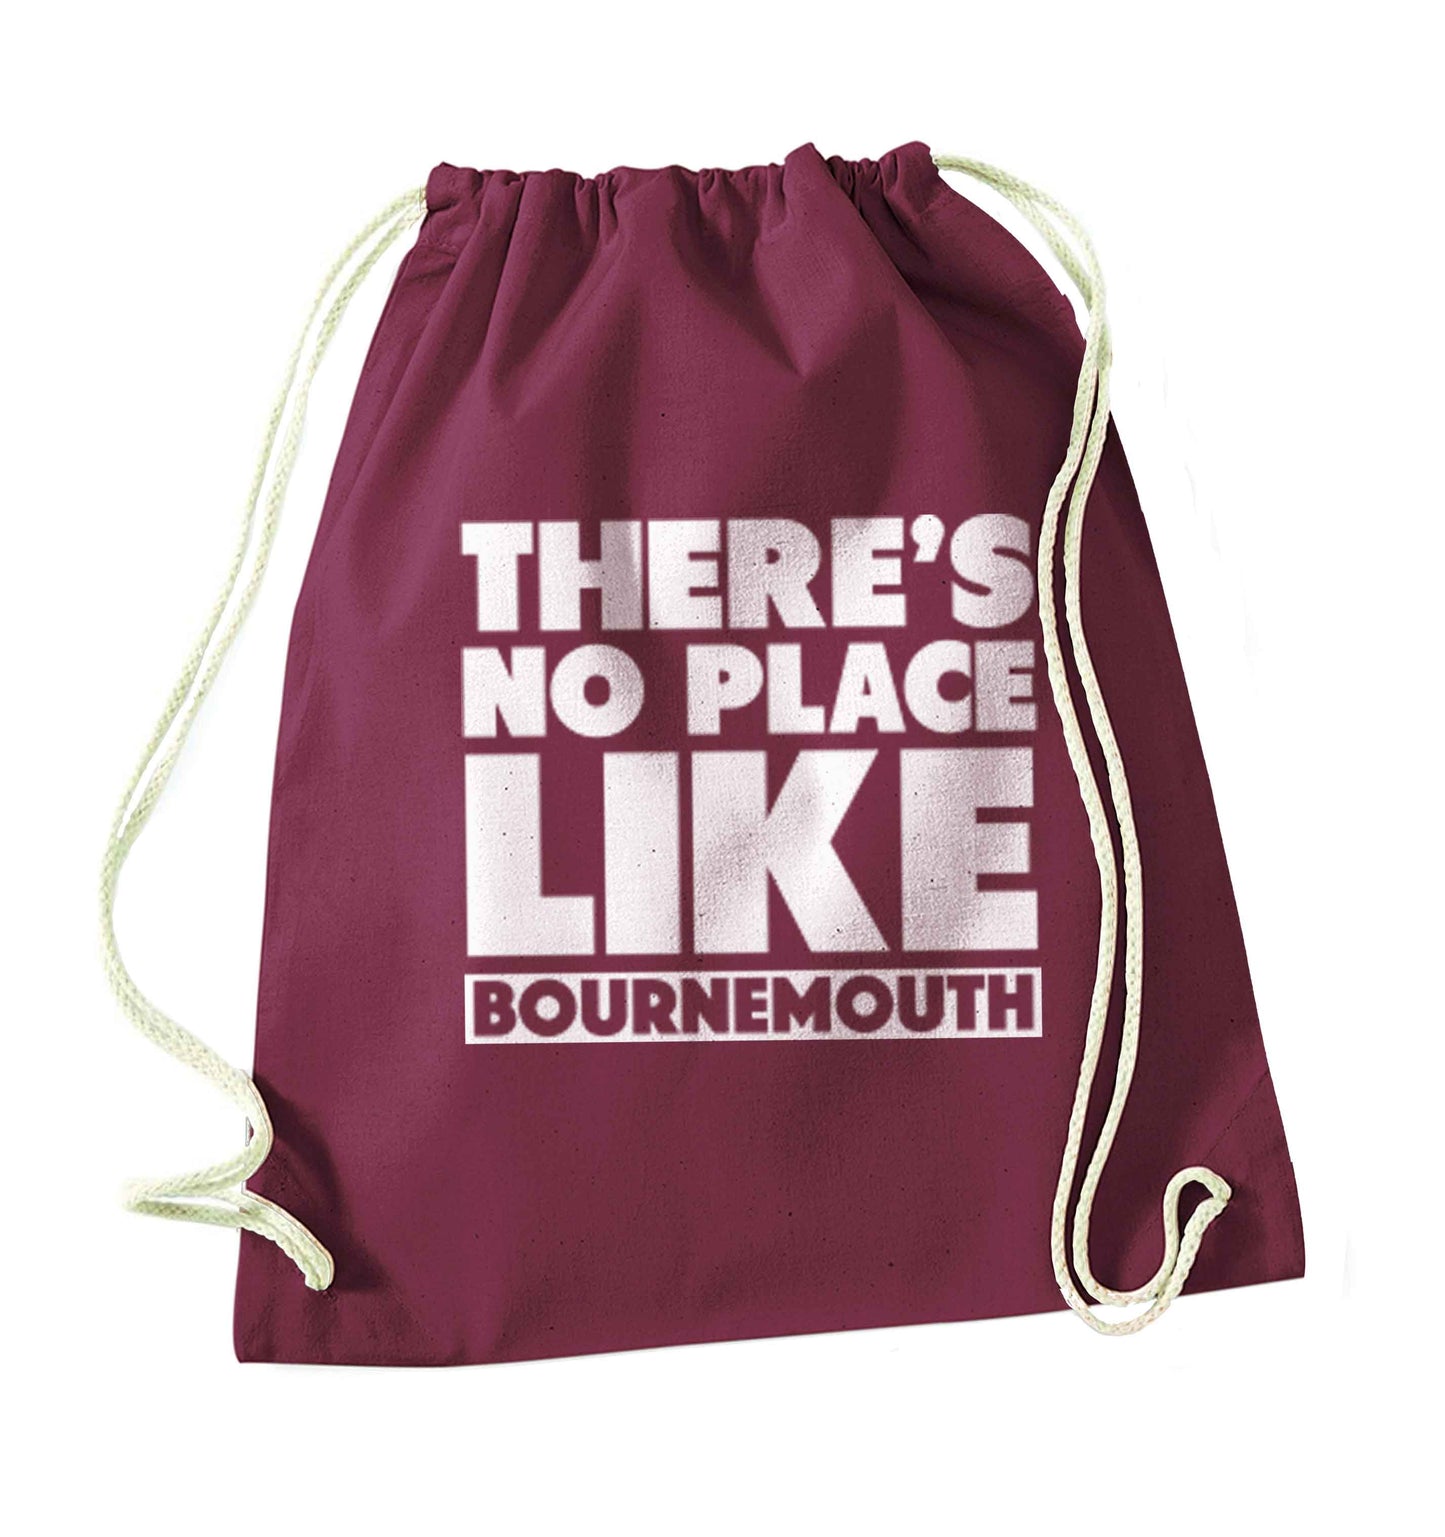 There's no place like Bournemouth maroon drawstring bag